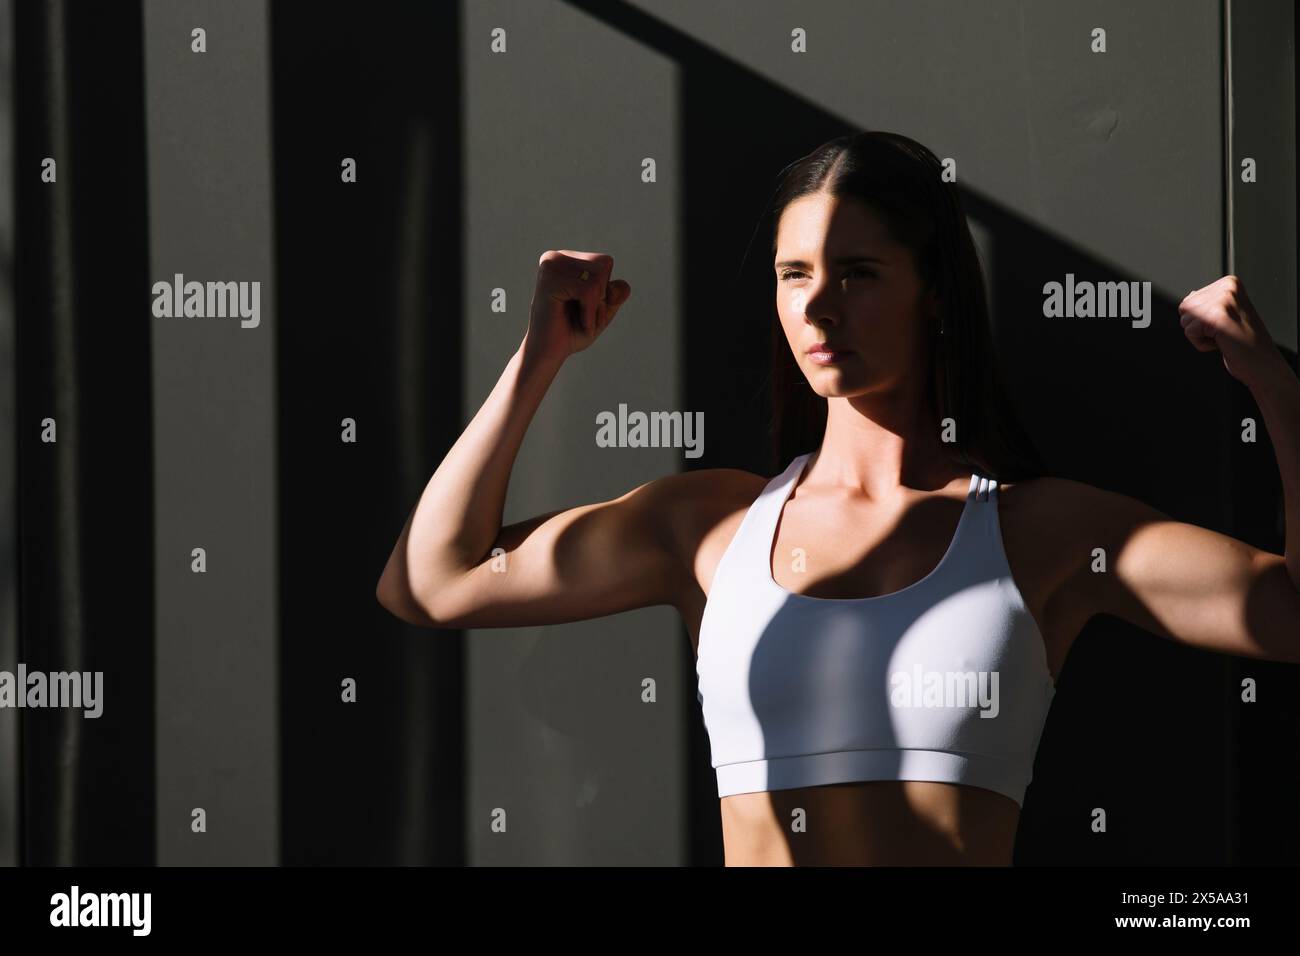 A fit woman in sportswear flexes her muscles confidently, illuminated by natural sunlight with a shadowy background Stock Photo